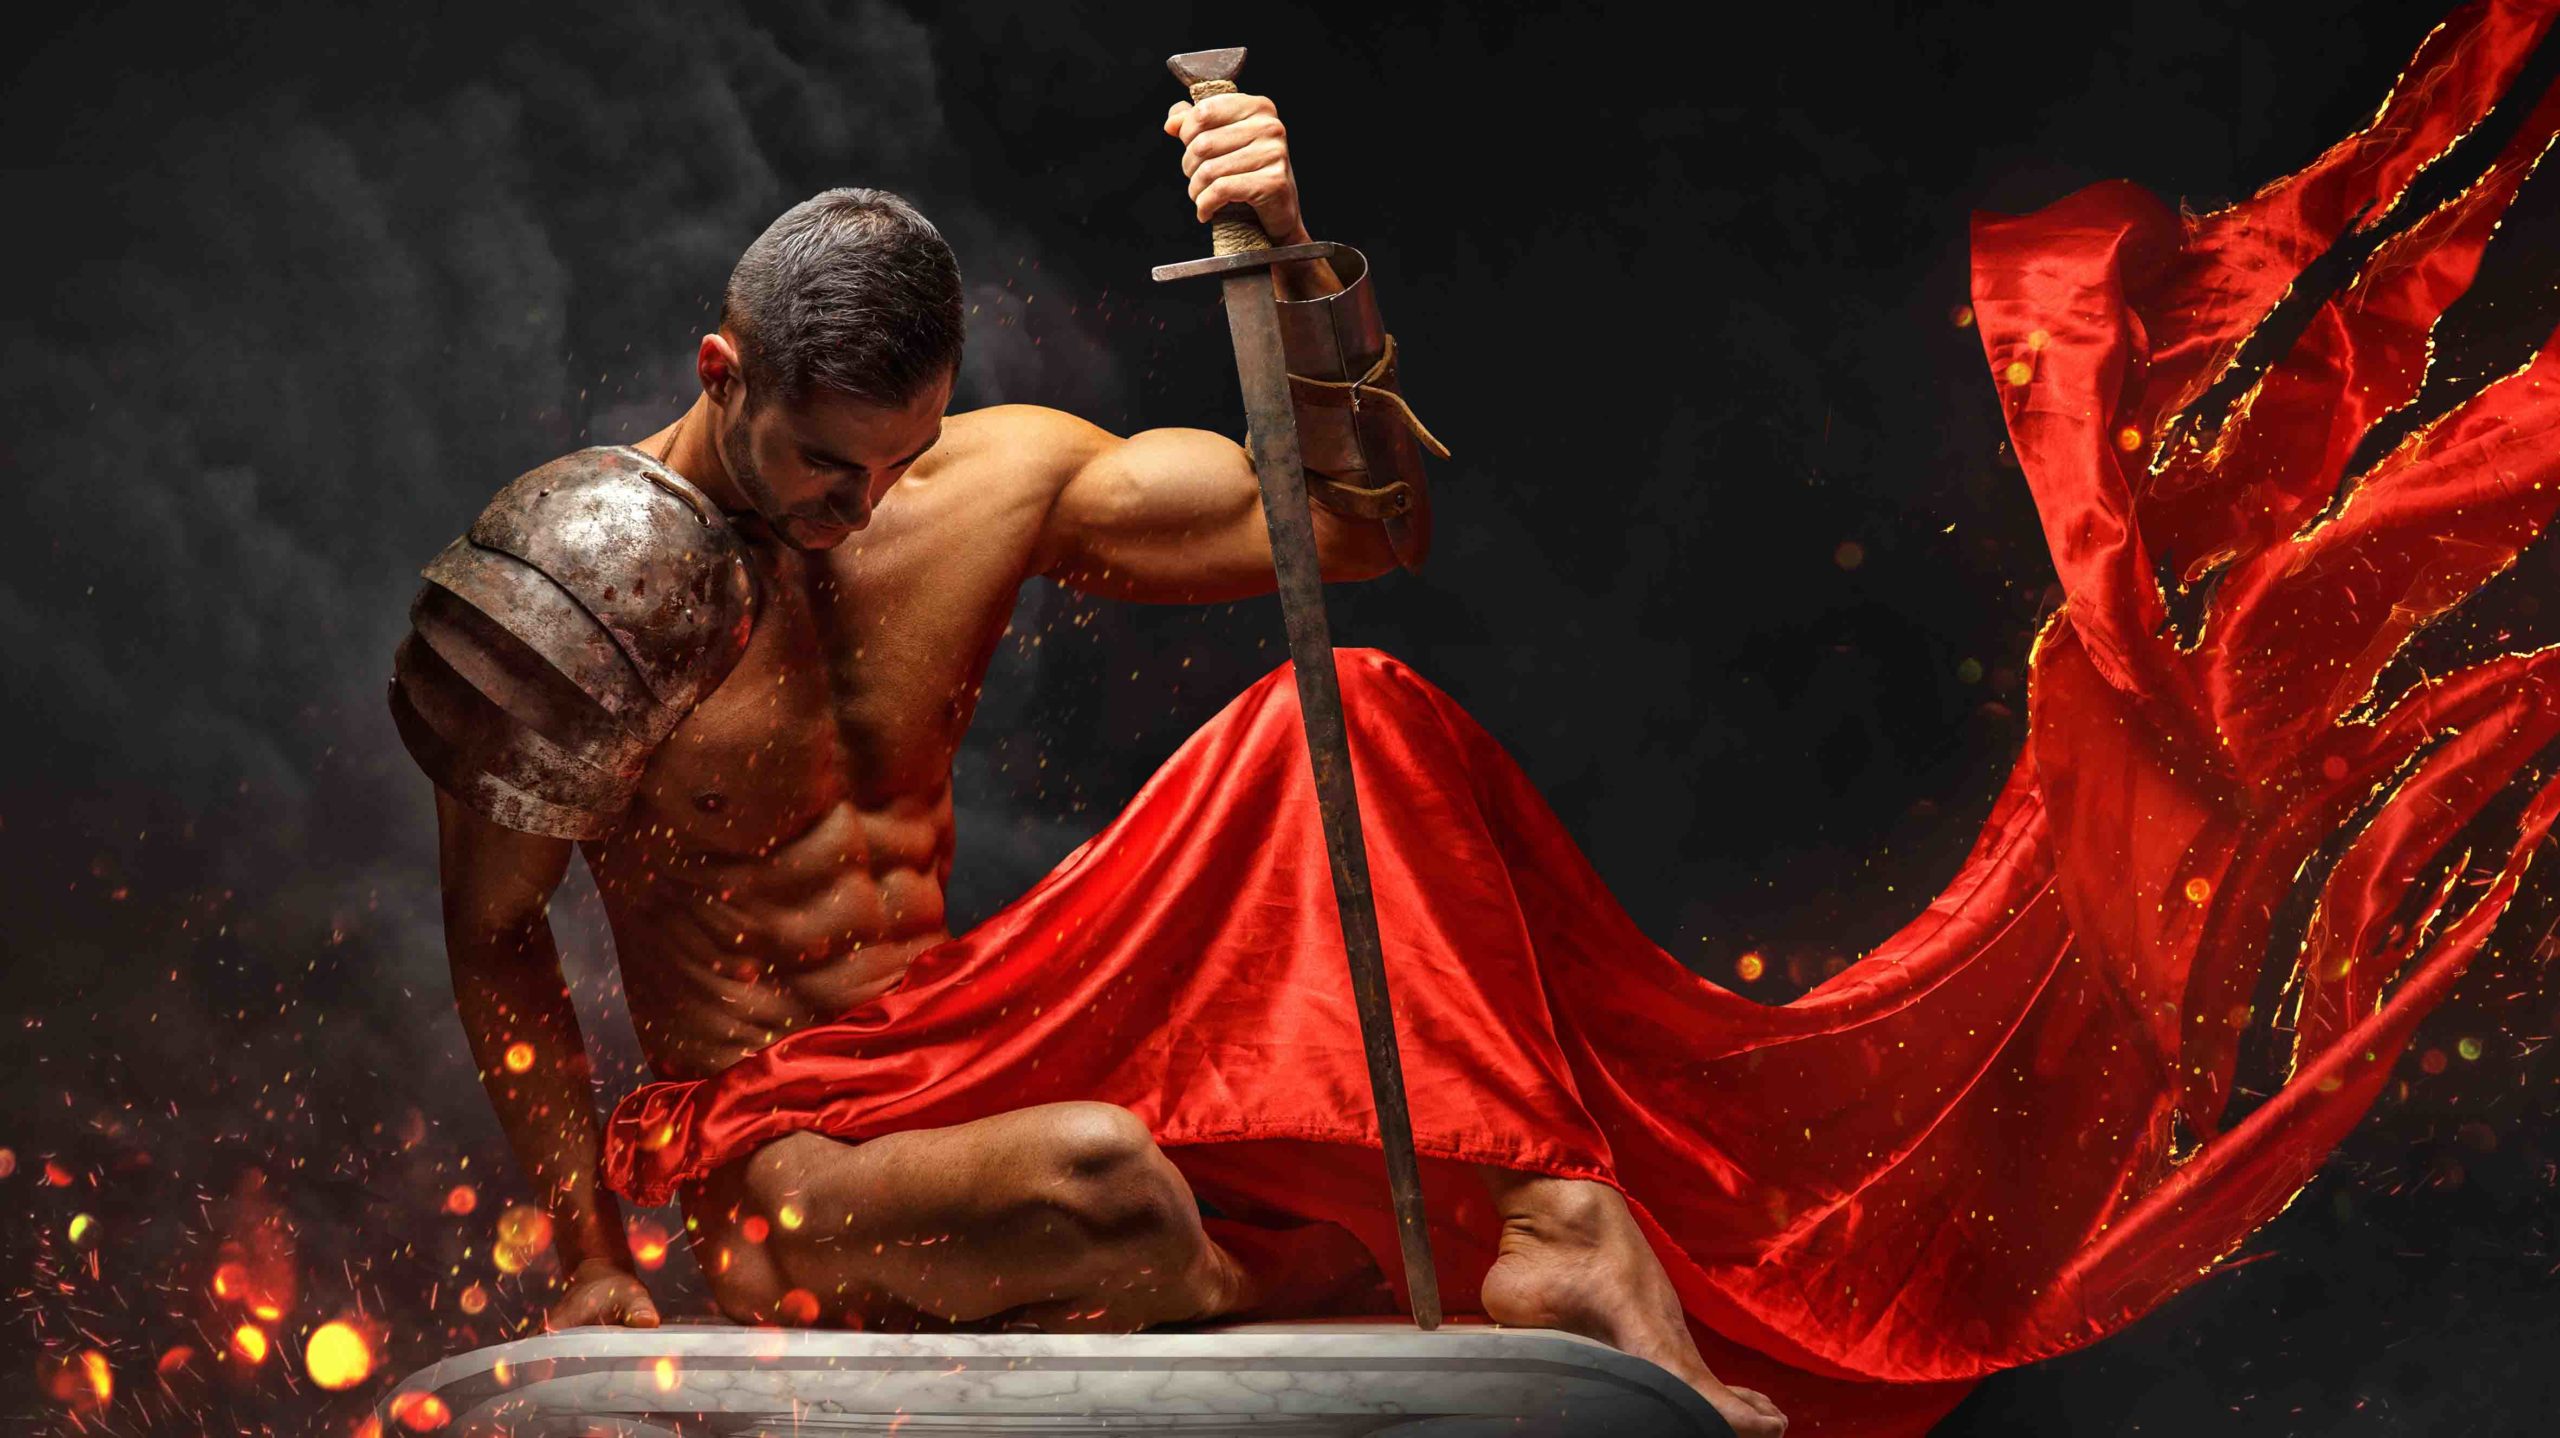 Artistic portrait of muscular male in red waving fabric with fire sparks holding sword.